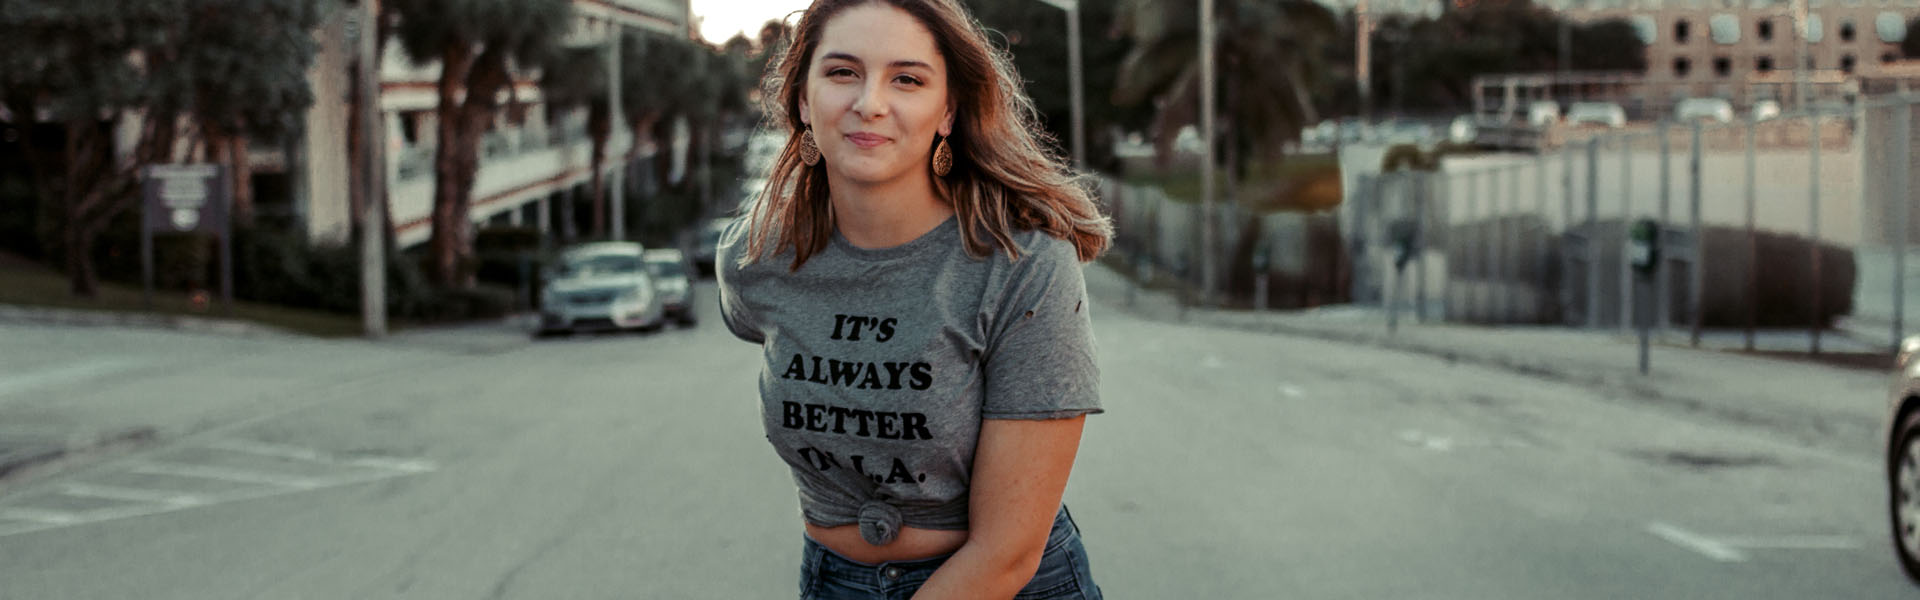 photo of a girl wearing a printed t-shirt